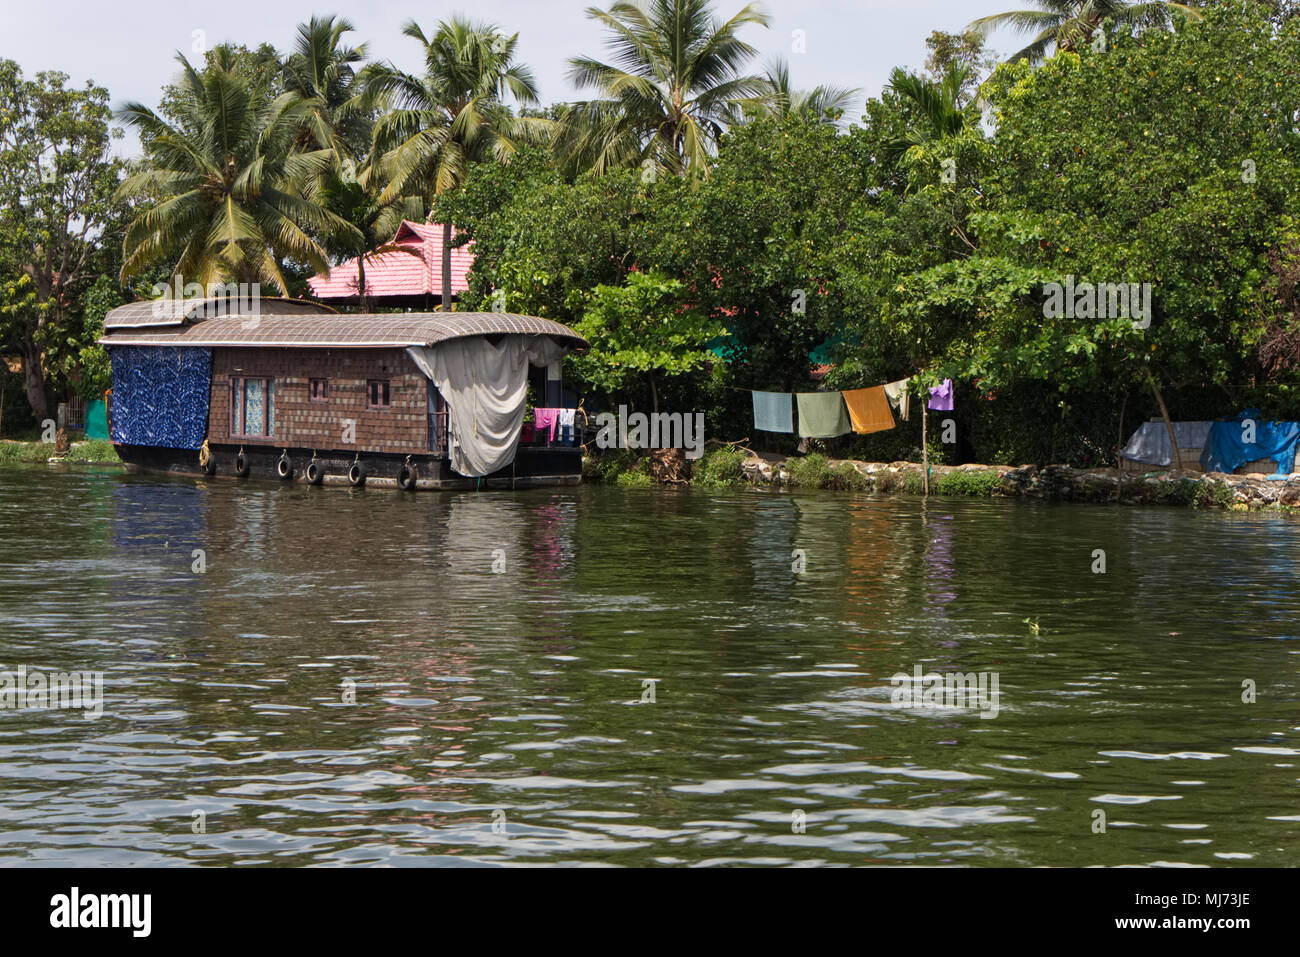 Alappuzha, Kerala / India - April 15 2018 : A tourist house boat is docked to one of the banks of the Alappuzha waterways. Stock Photo